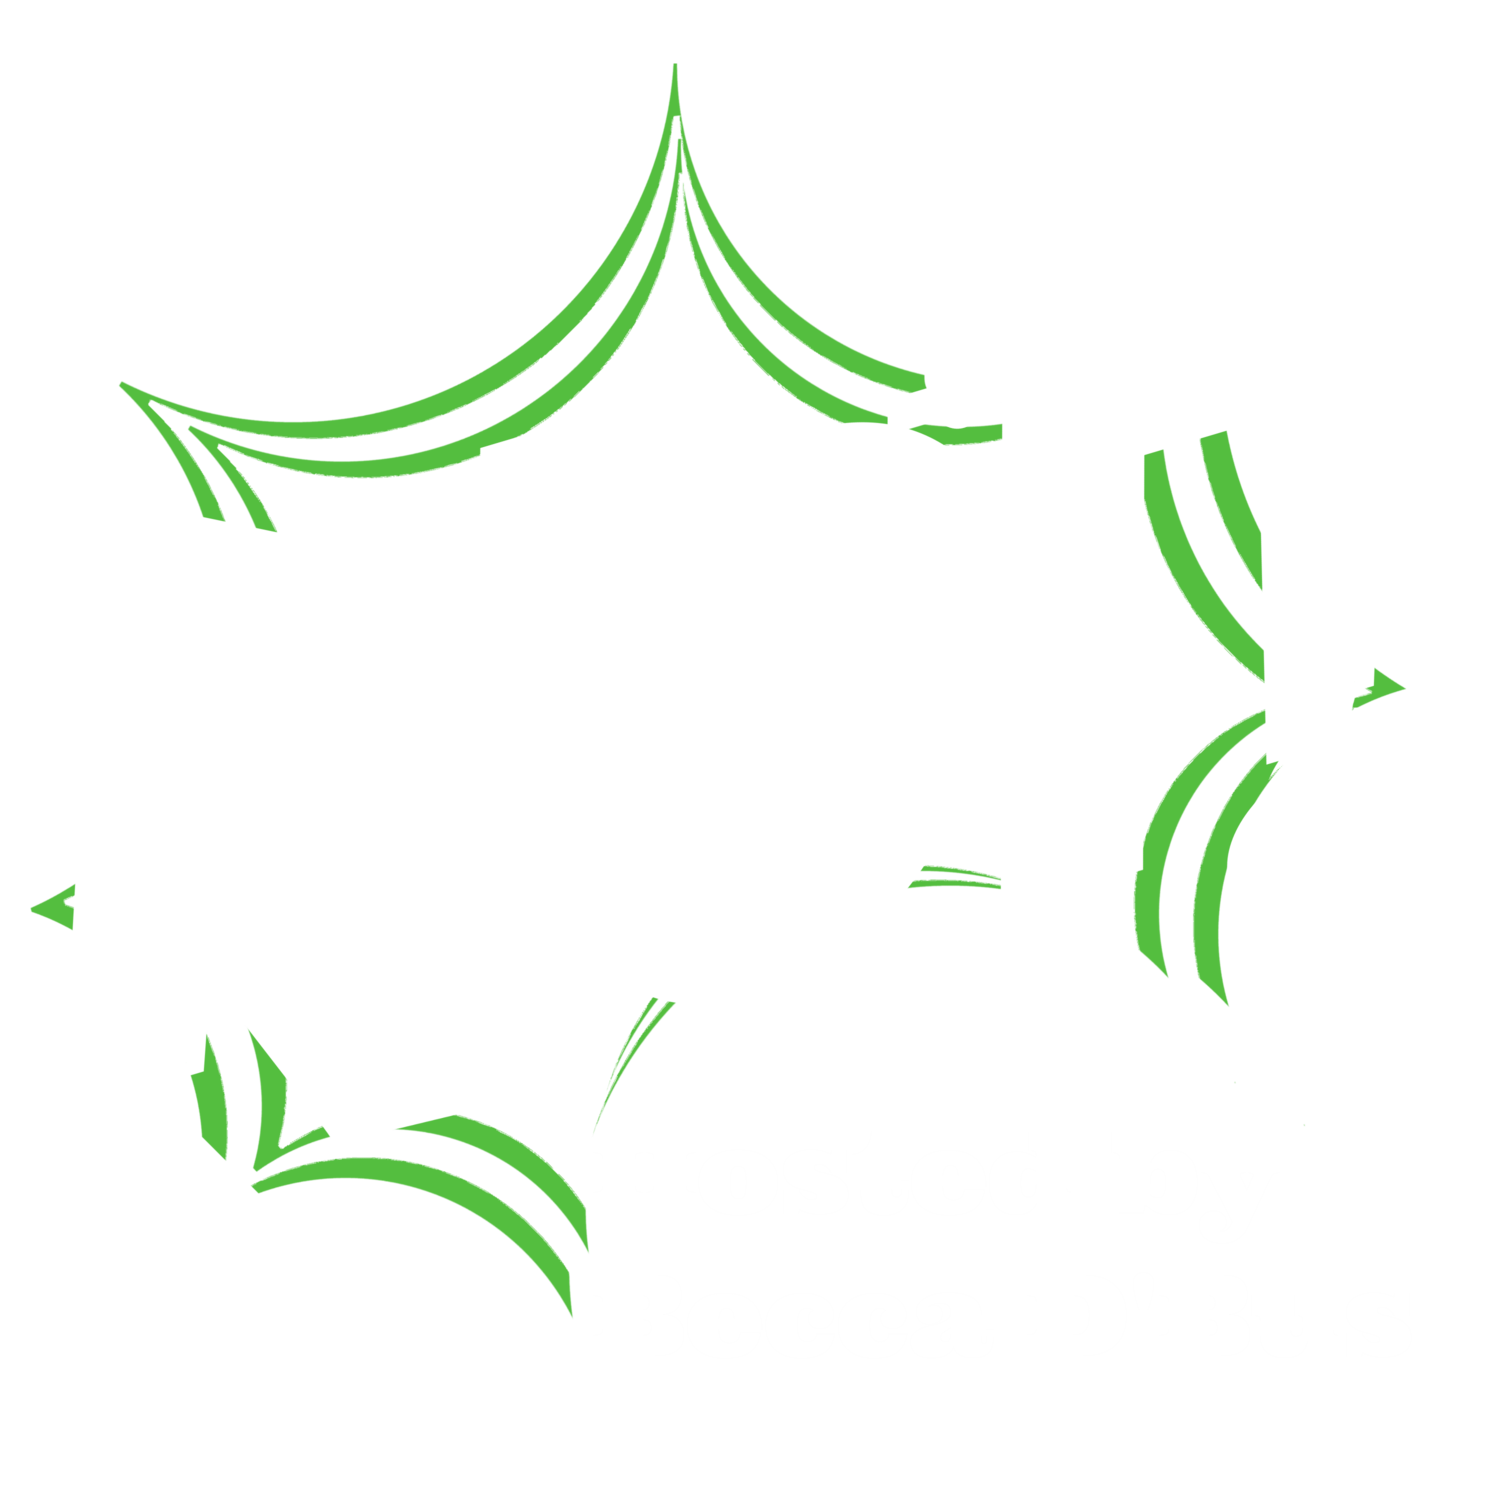 RIOT! Hosted by Becca D'Bus